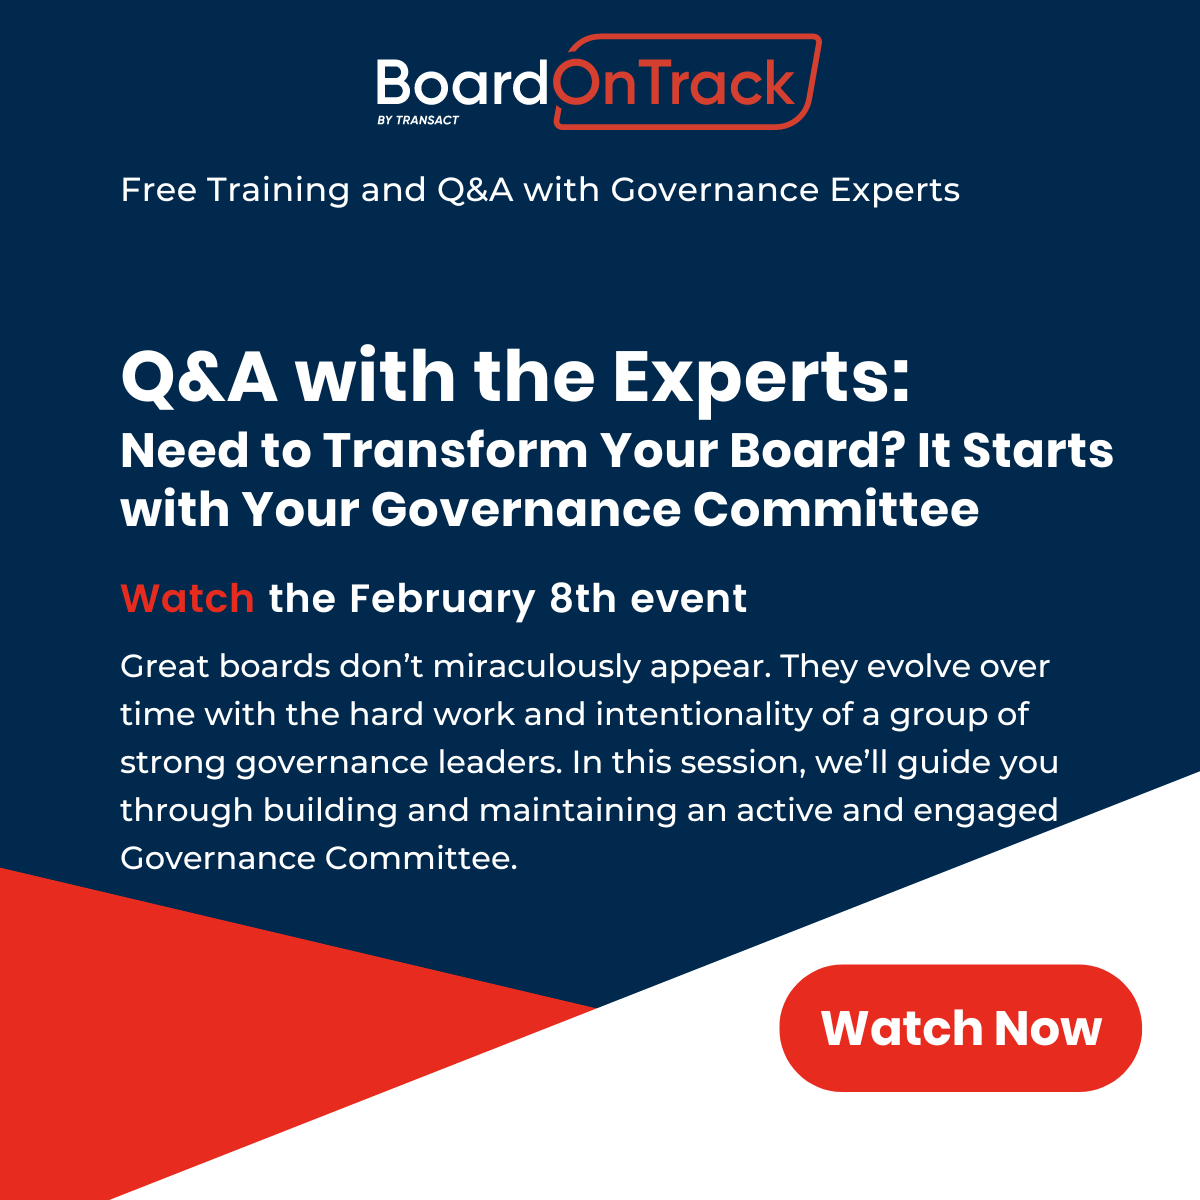 Watch the February 8th event: Need to Transform Your Board? It Starts with Your Governance Committee 